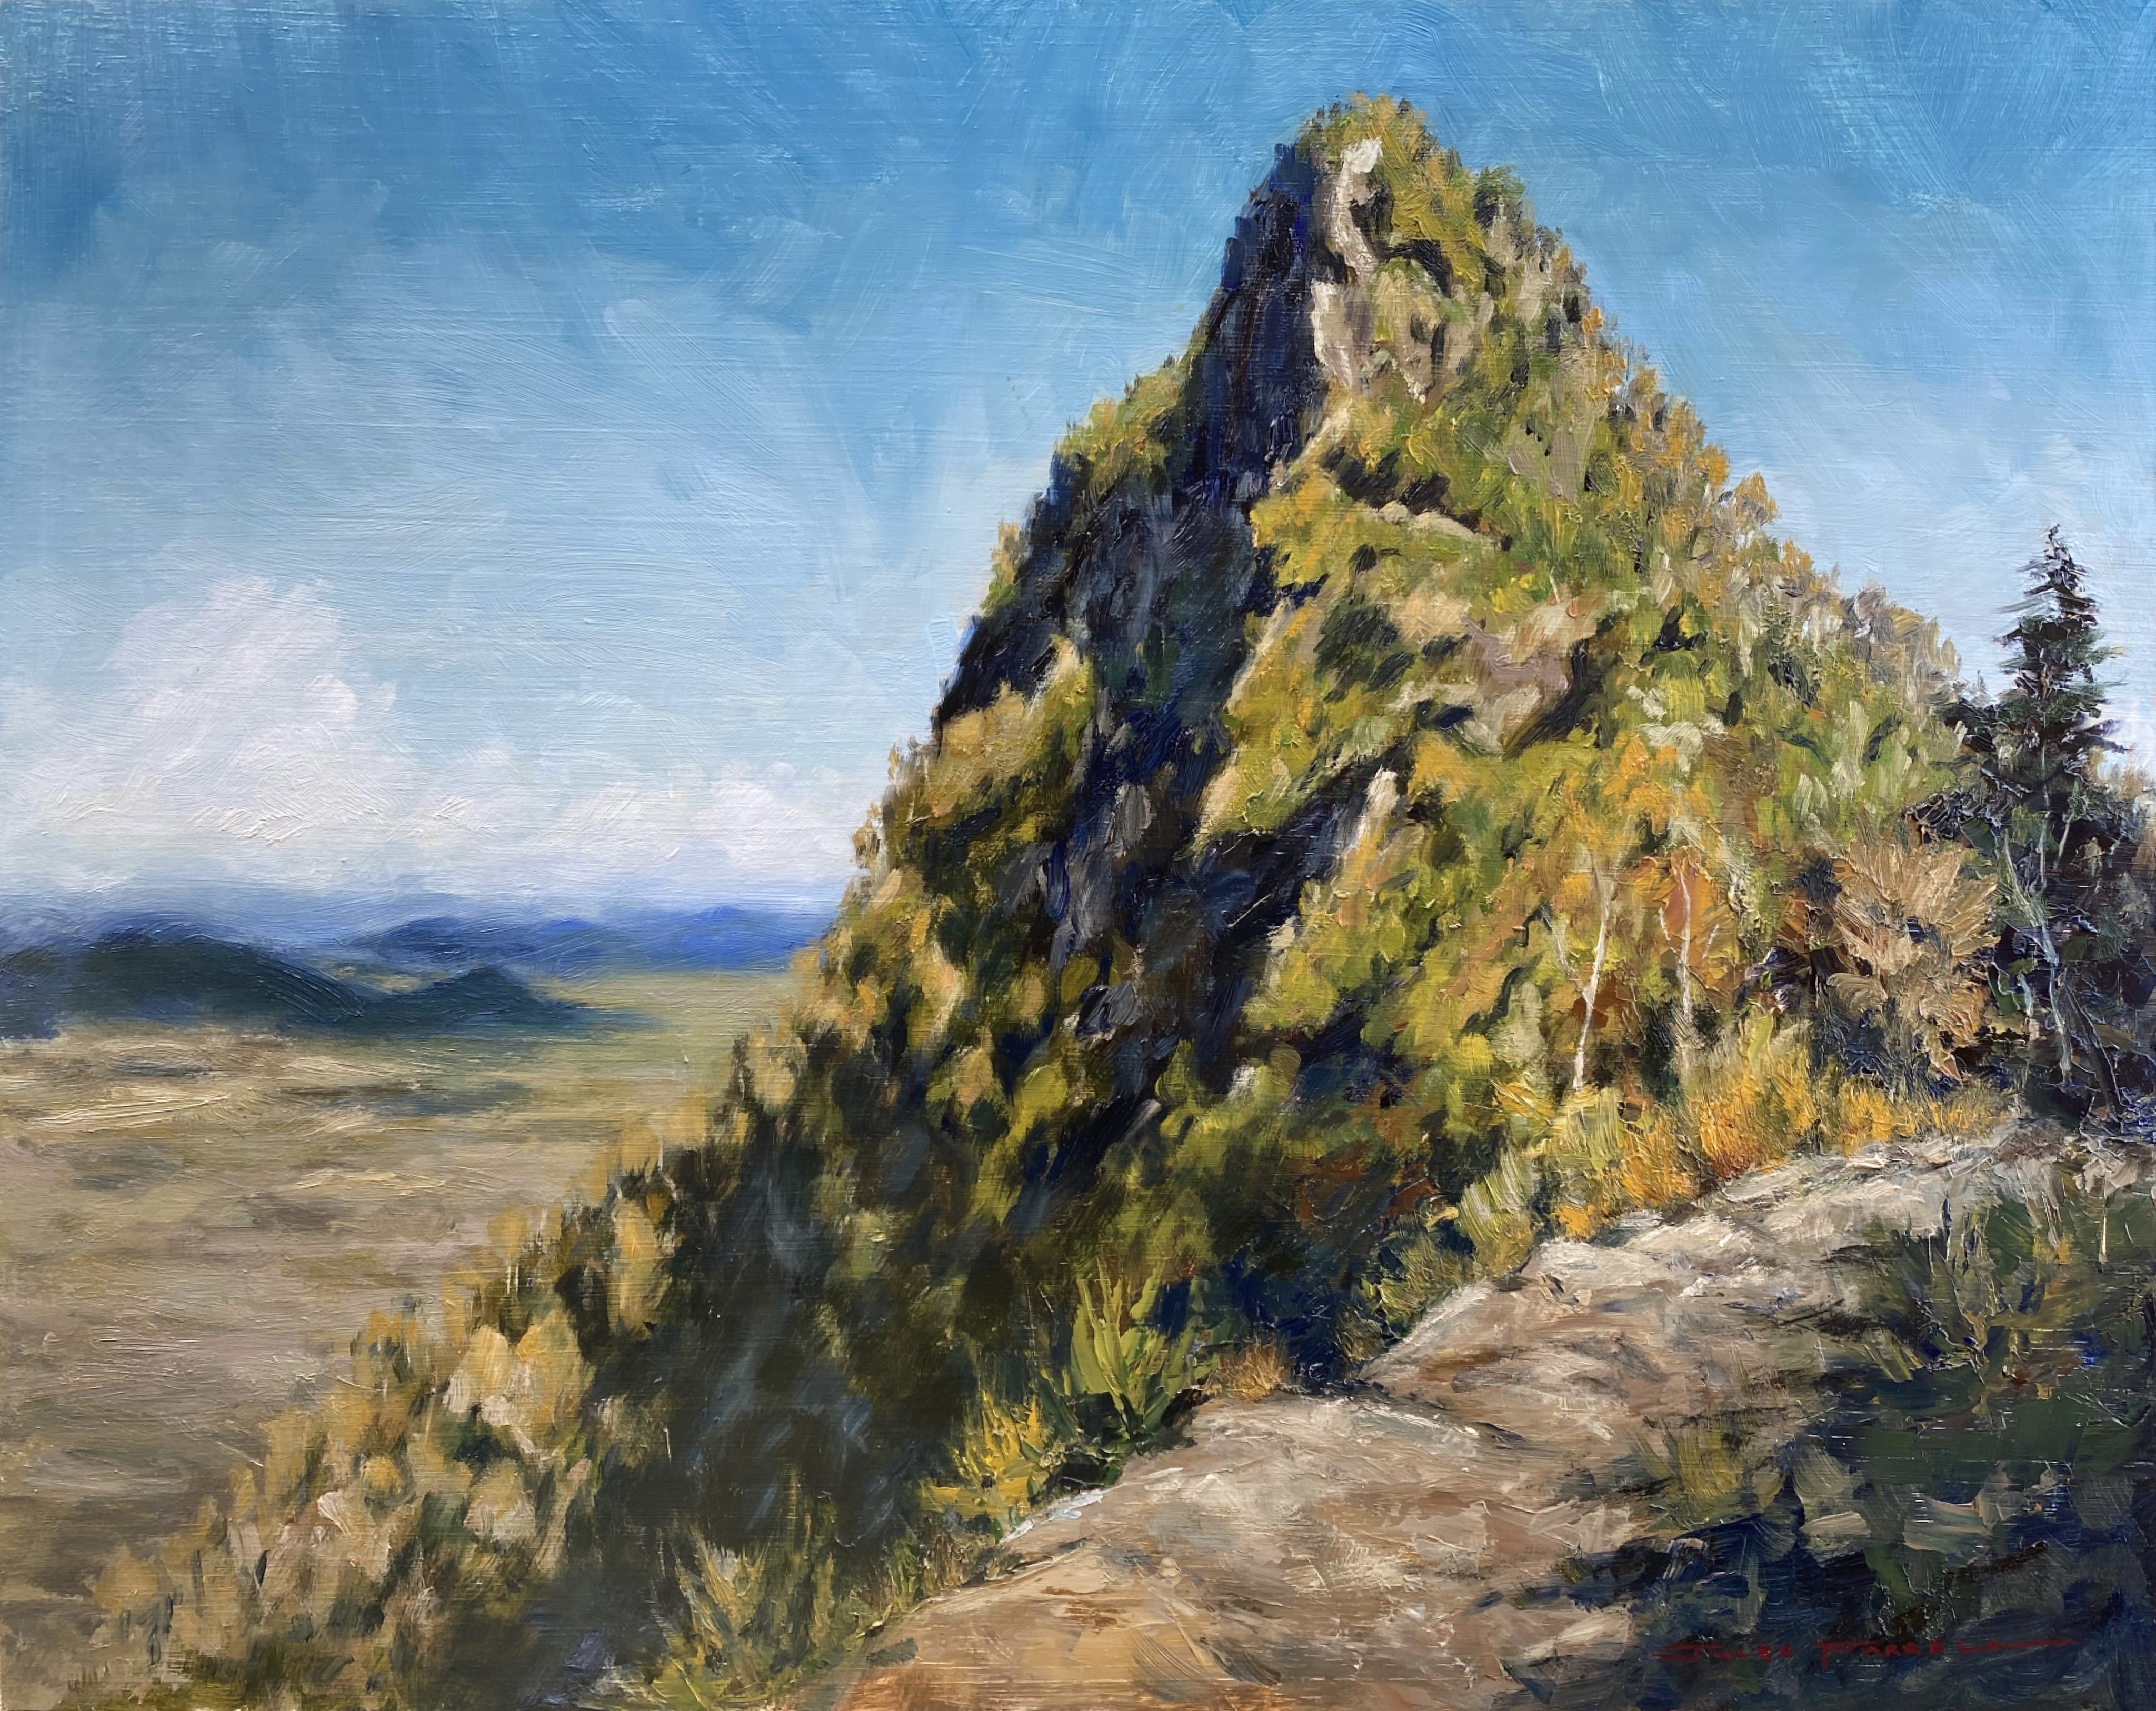 Rising above the Scenic Rim by Jules Farrell | Lethbridge Landscape Prize 2023 Finalists | Lethbridge Gallery